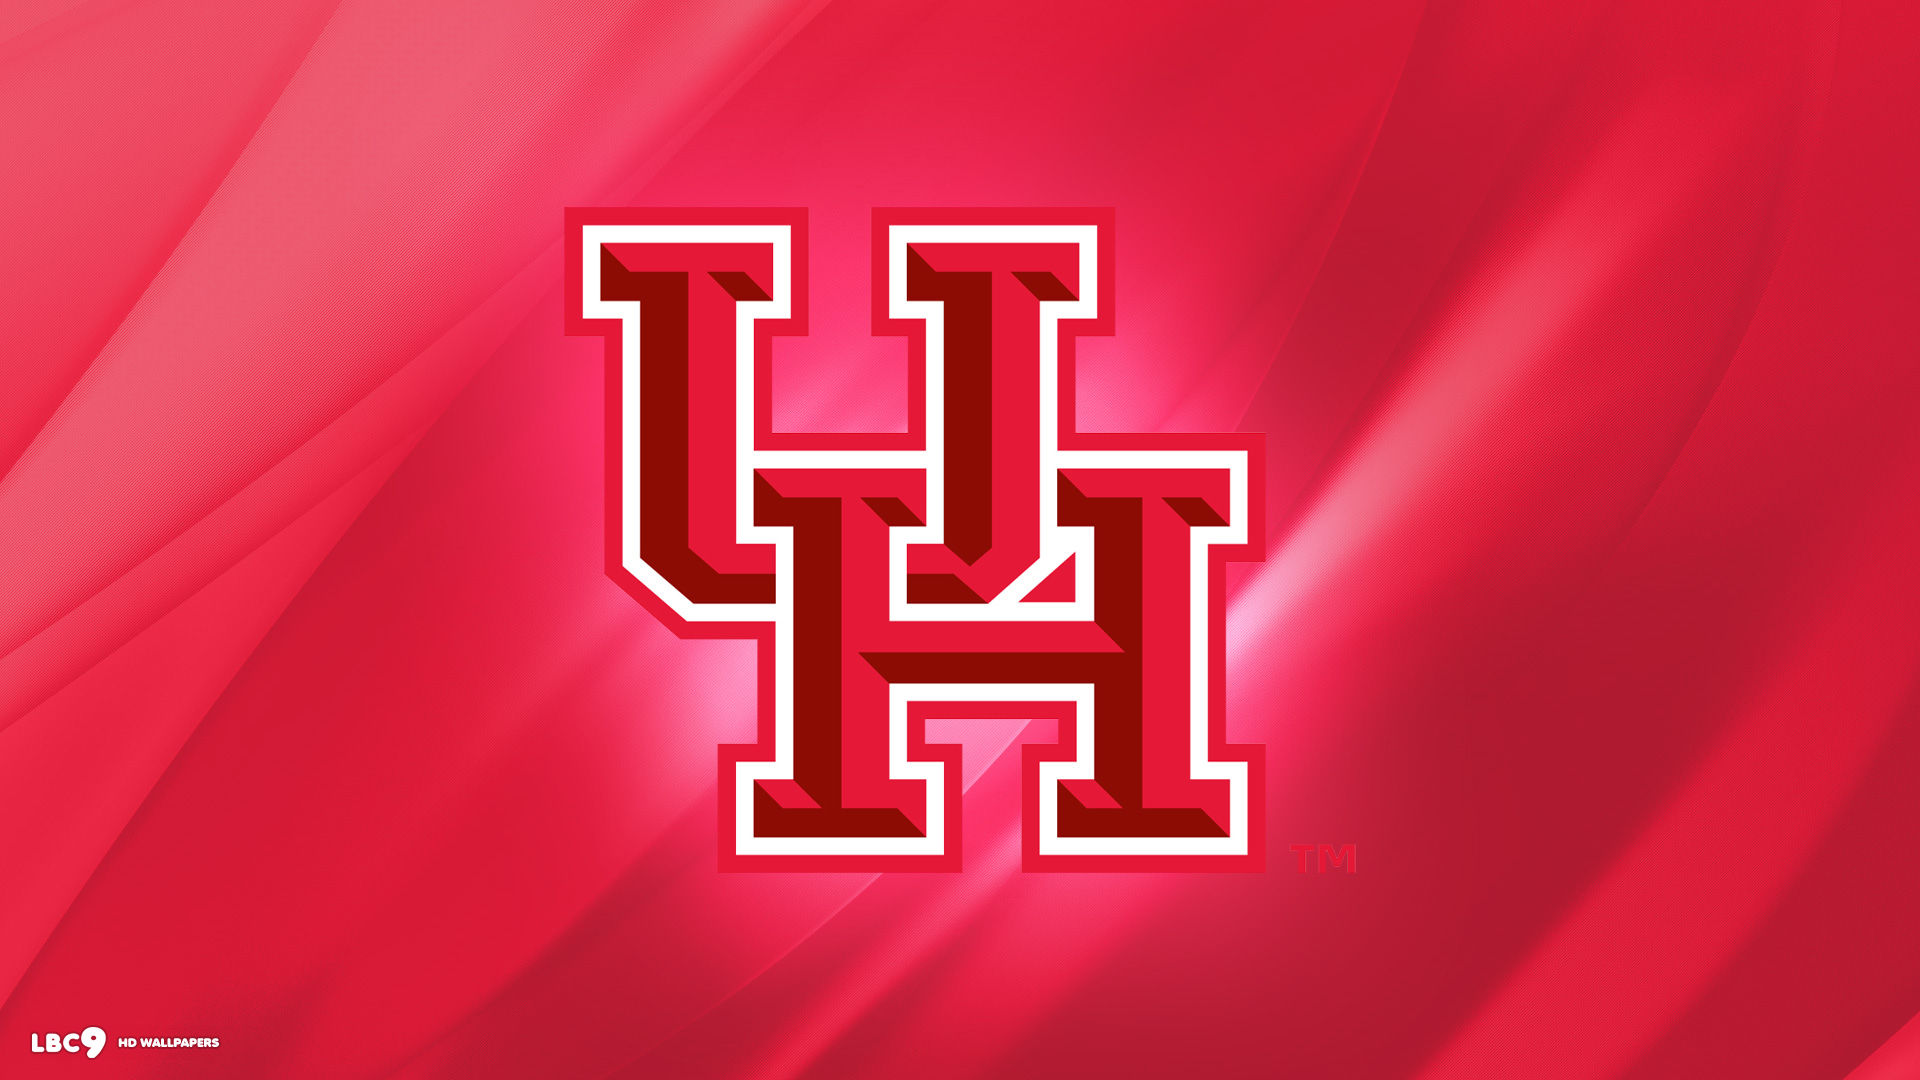 Houston cougars wallpaper 1 / 3 college athletics hd backgrounds